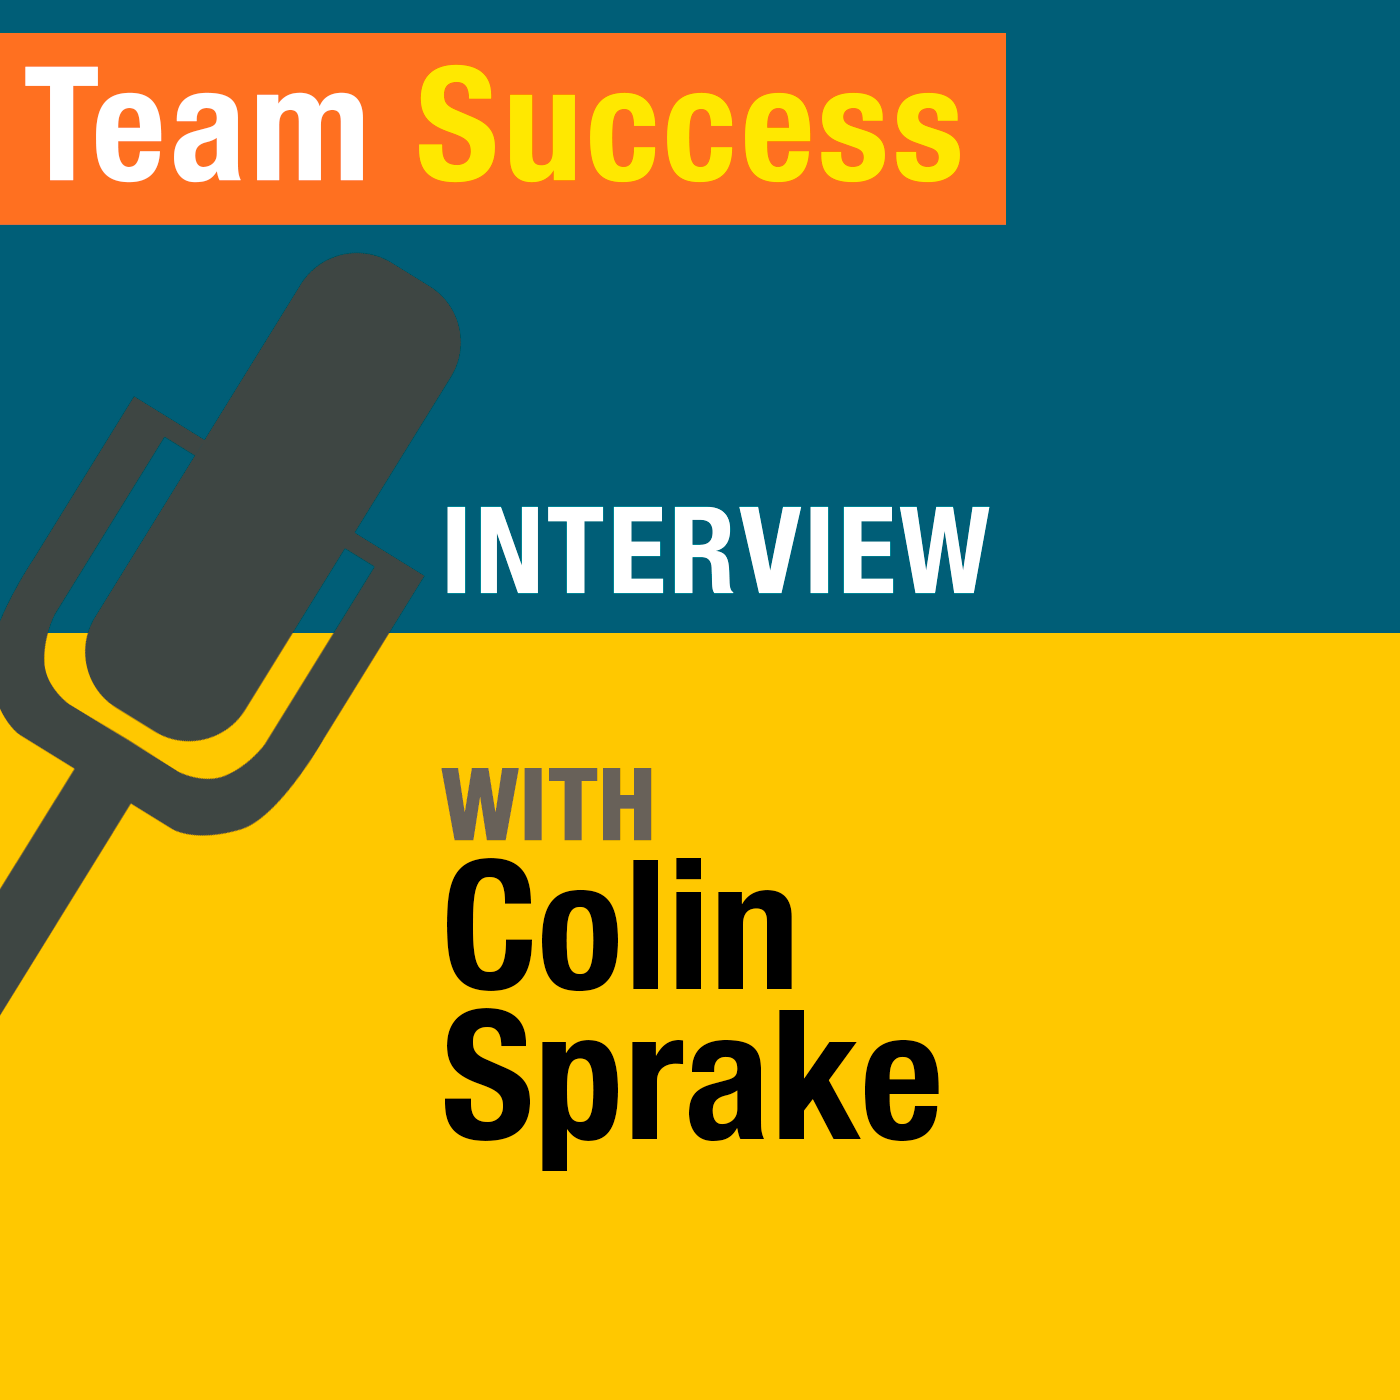 How To Improve Your Hiring With Colin Sprake Of Make Your Mark Training & Consulting